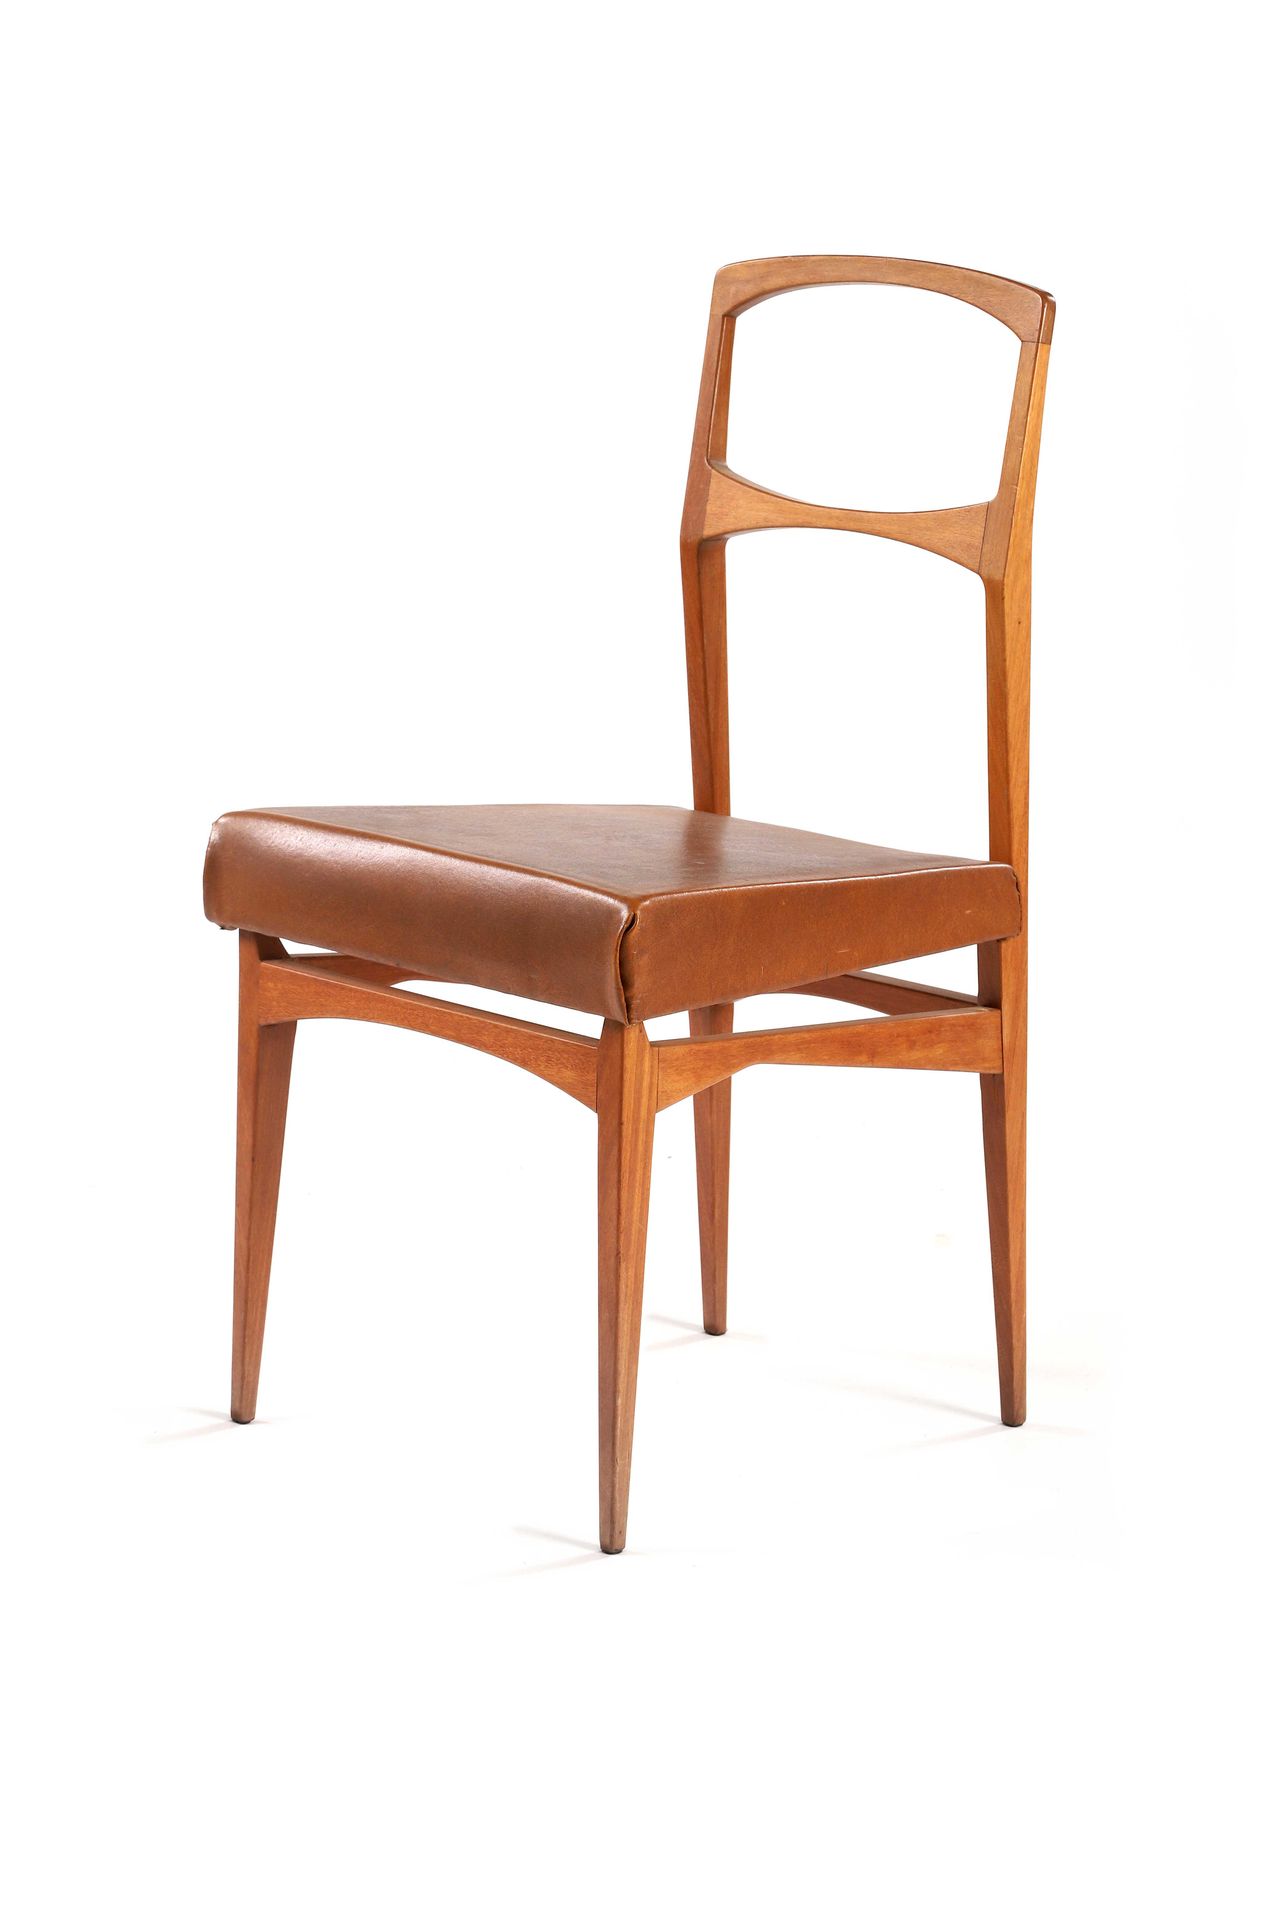 Null Maurice PRE (1907-1988) 

Chair Mahogany, leather 87 x 47 x 48 cm. 1958 

C&hellip;